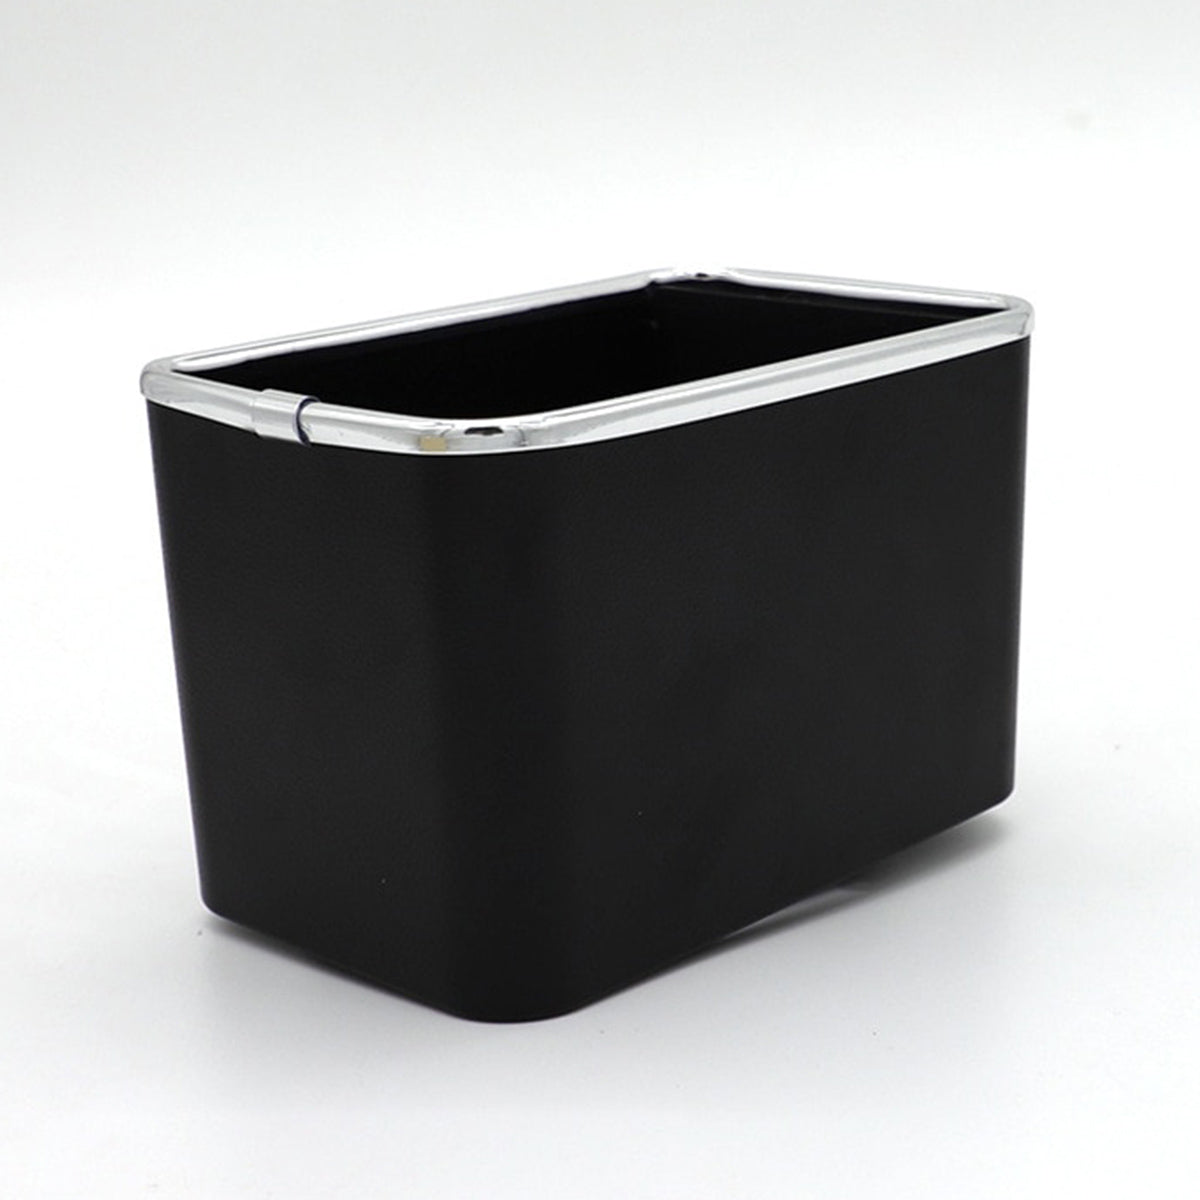 Car Armrest Storage Box Coffee Cup Water Drink Holder for Rear Seat, Custom fit for Land Rover